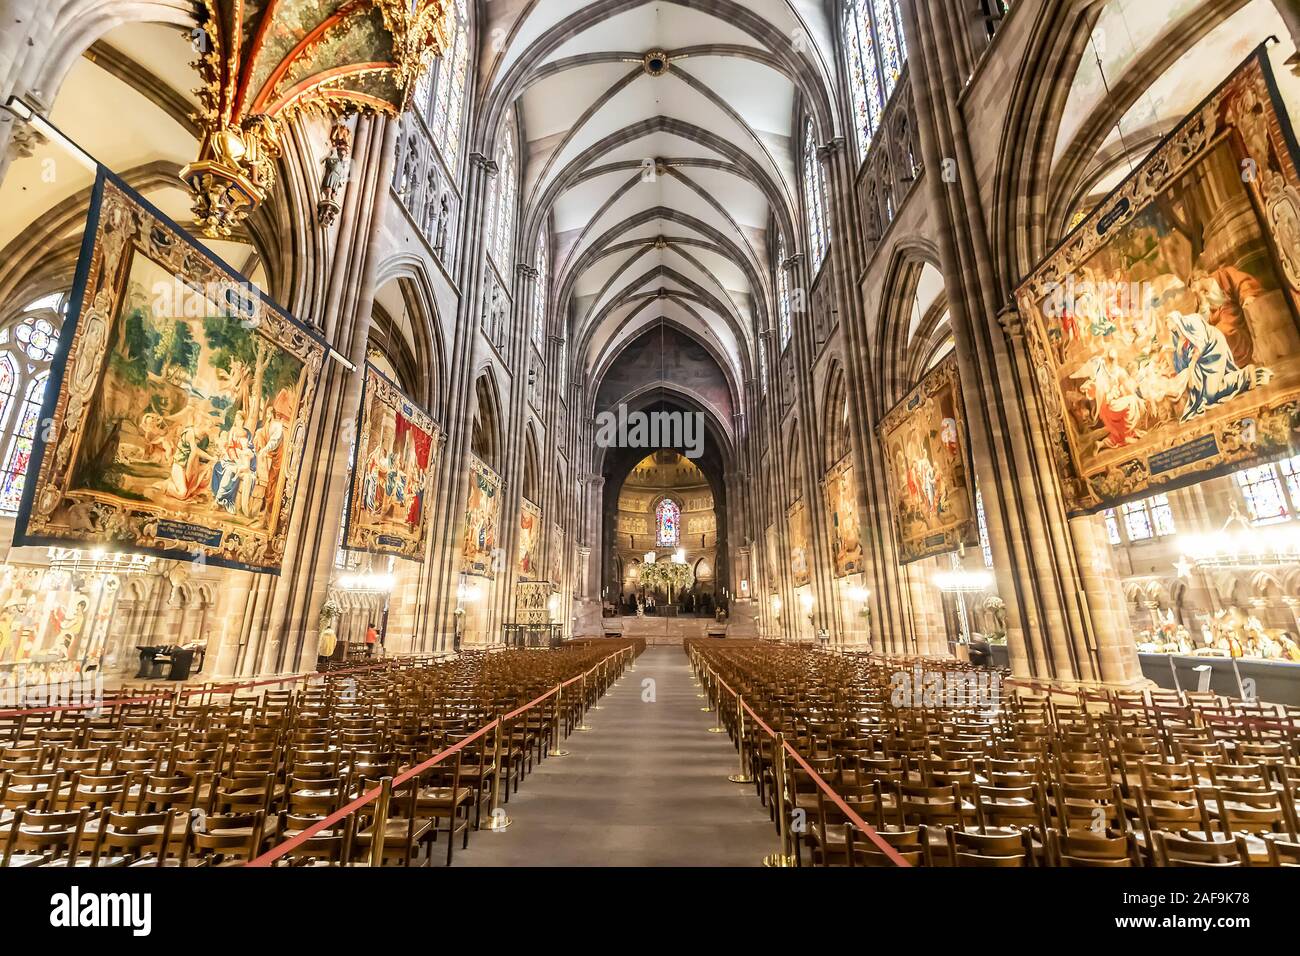 Strasbourg, France - december 1,2019: Interior of Strasbourg Cathedral or the Cathedral of Our Lady of Strasbourg, also known as Strasbourg Minster, C Stock Photo